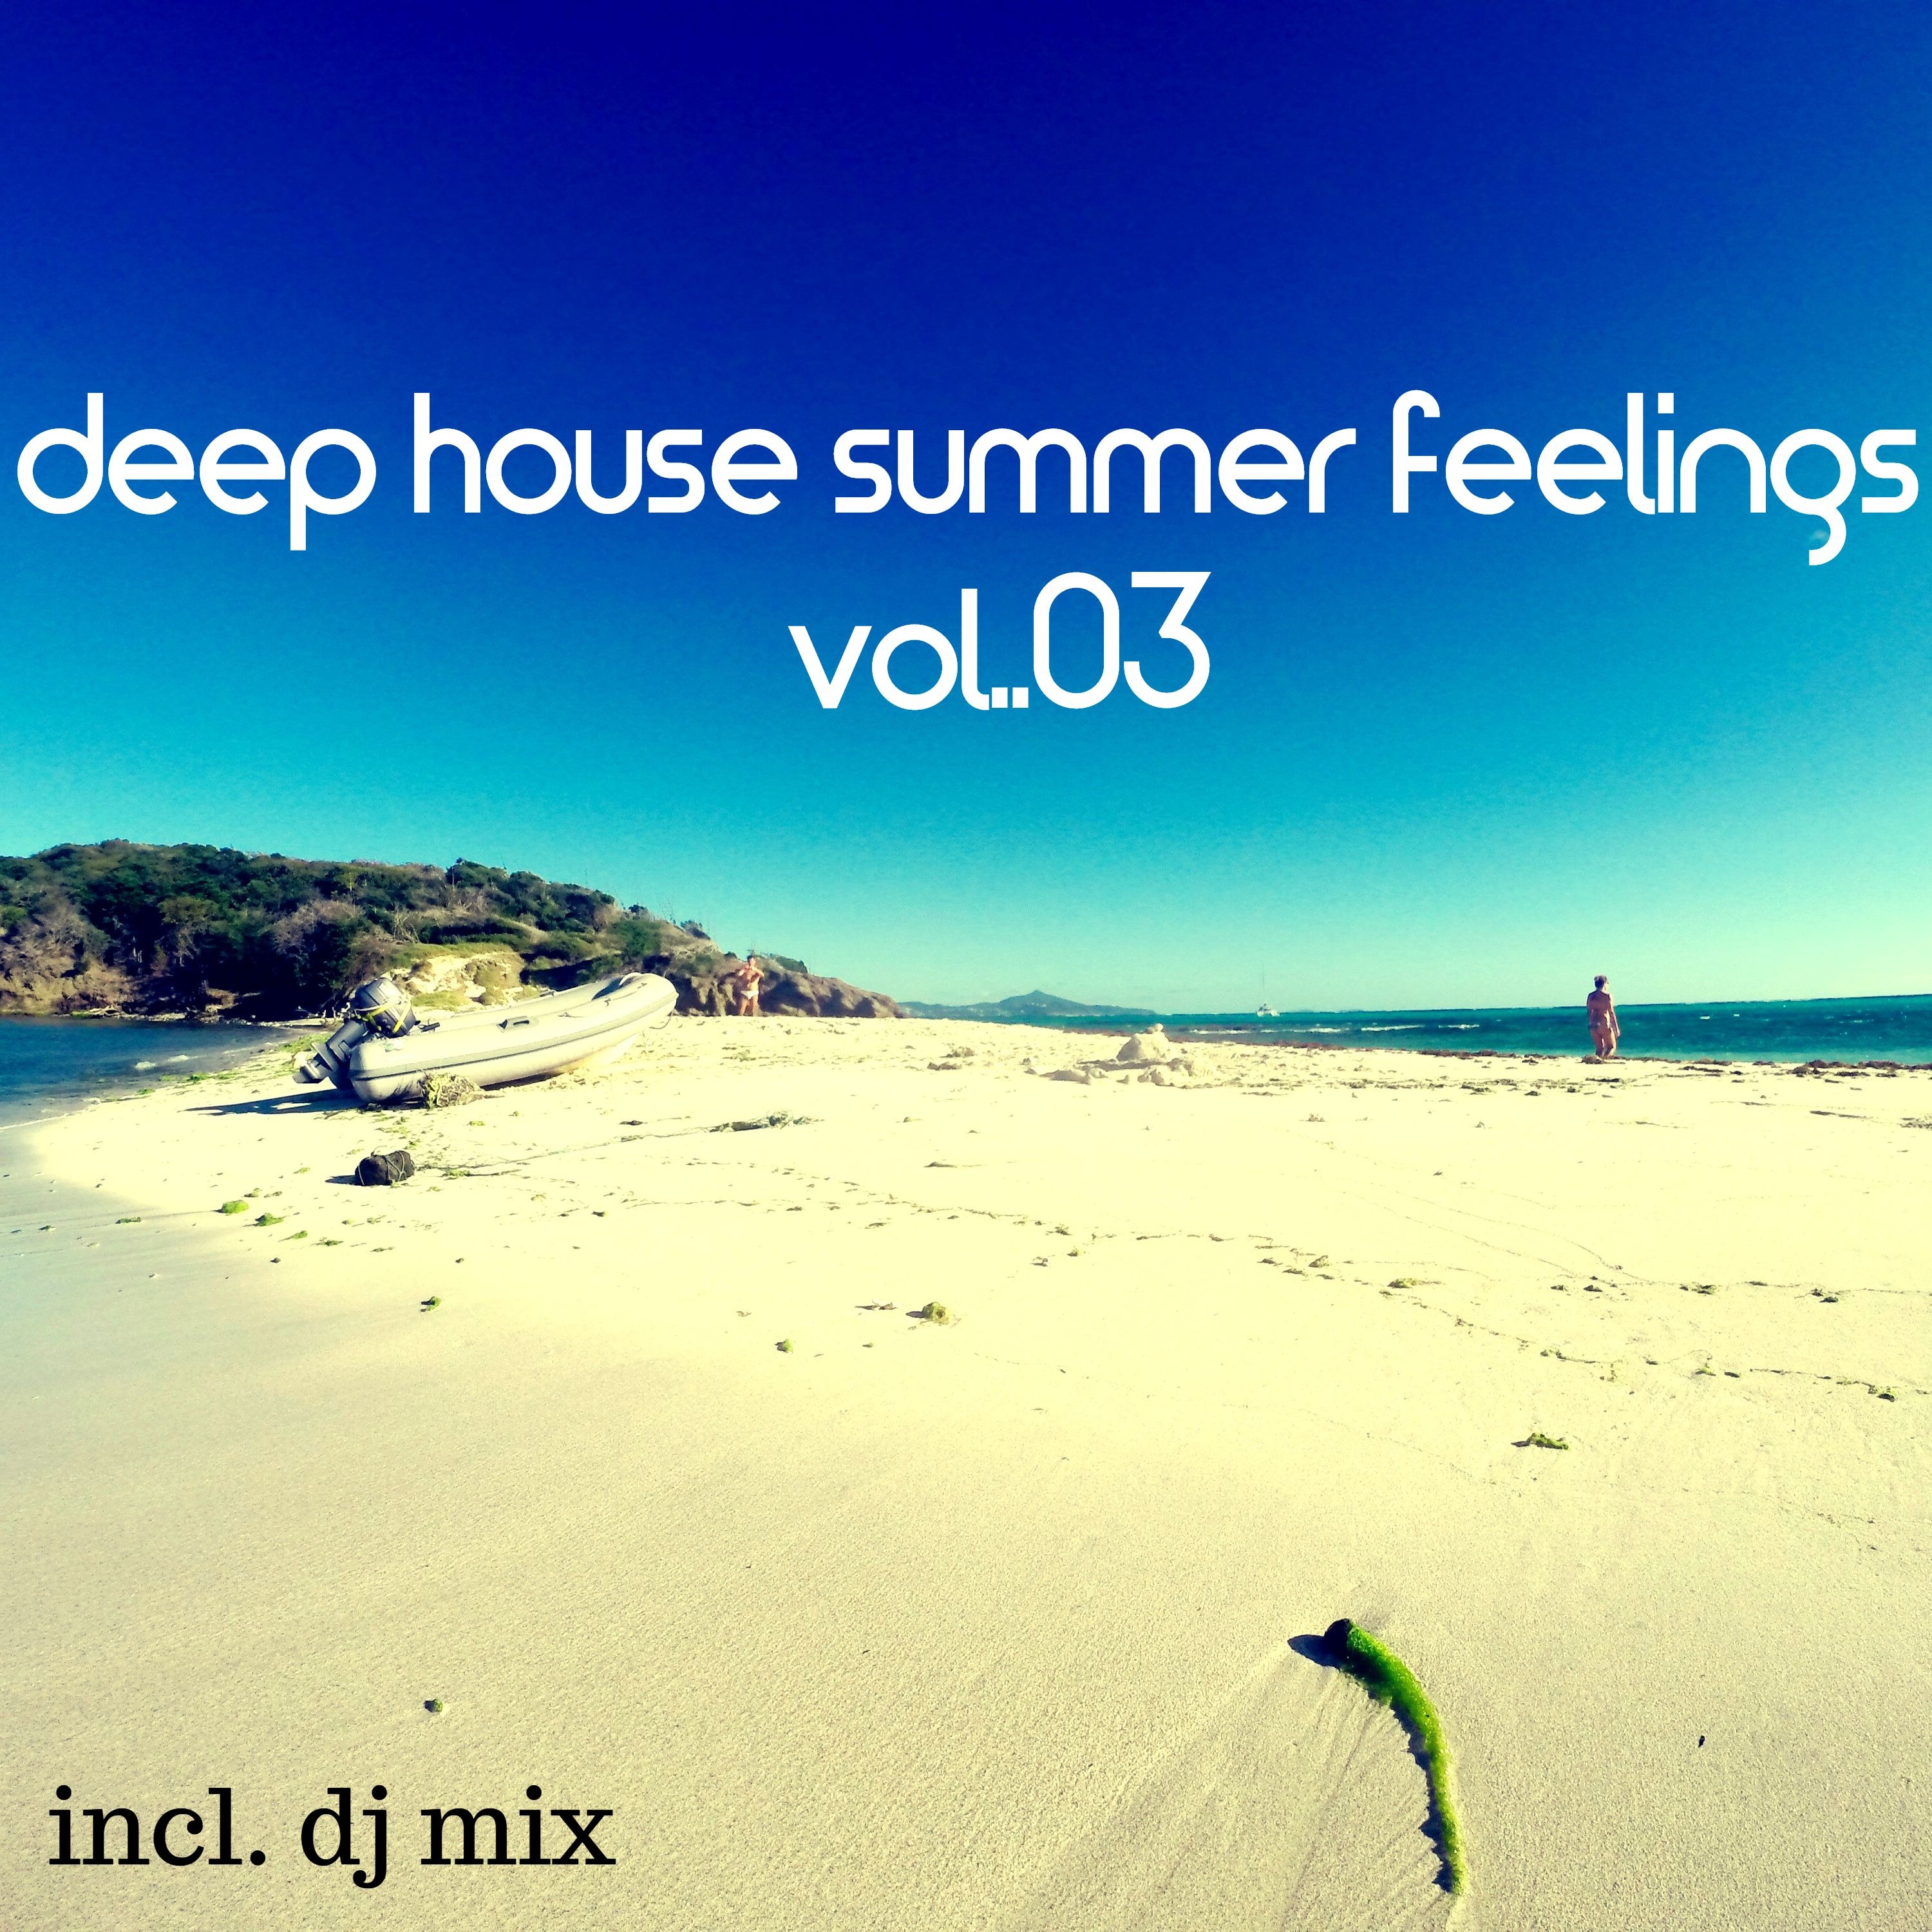 Deep House Summer Feelings, Vol. 03 (Mixed by Avi Pasko) [Continuous DJ Mix]